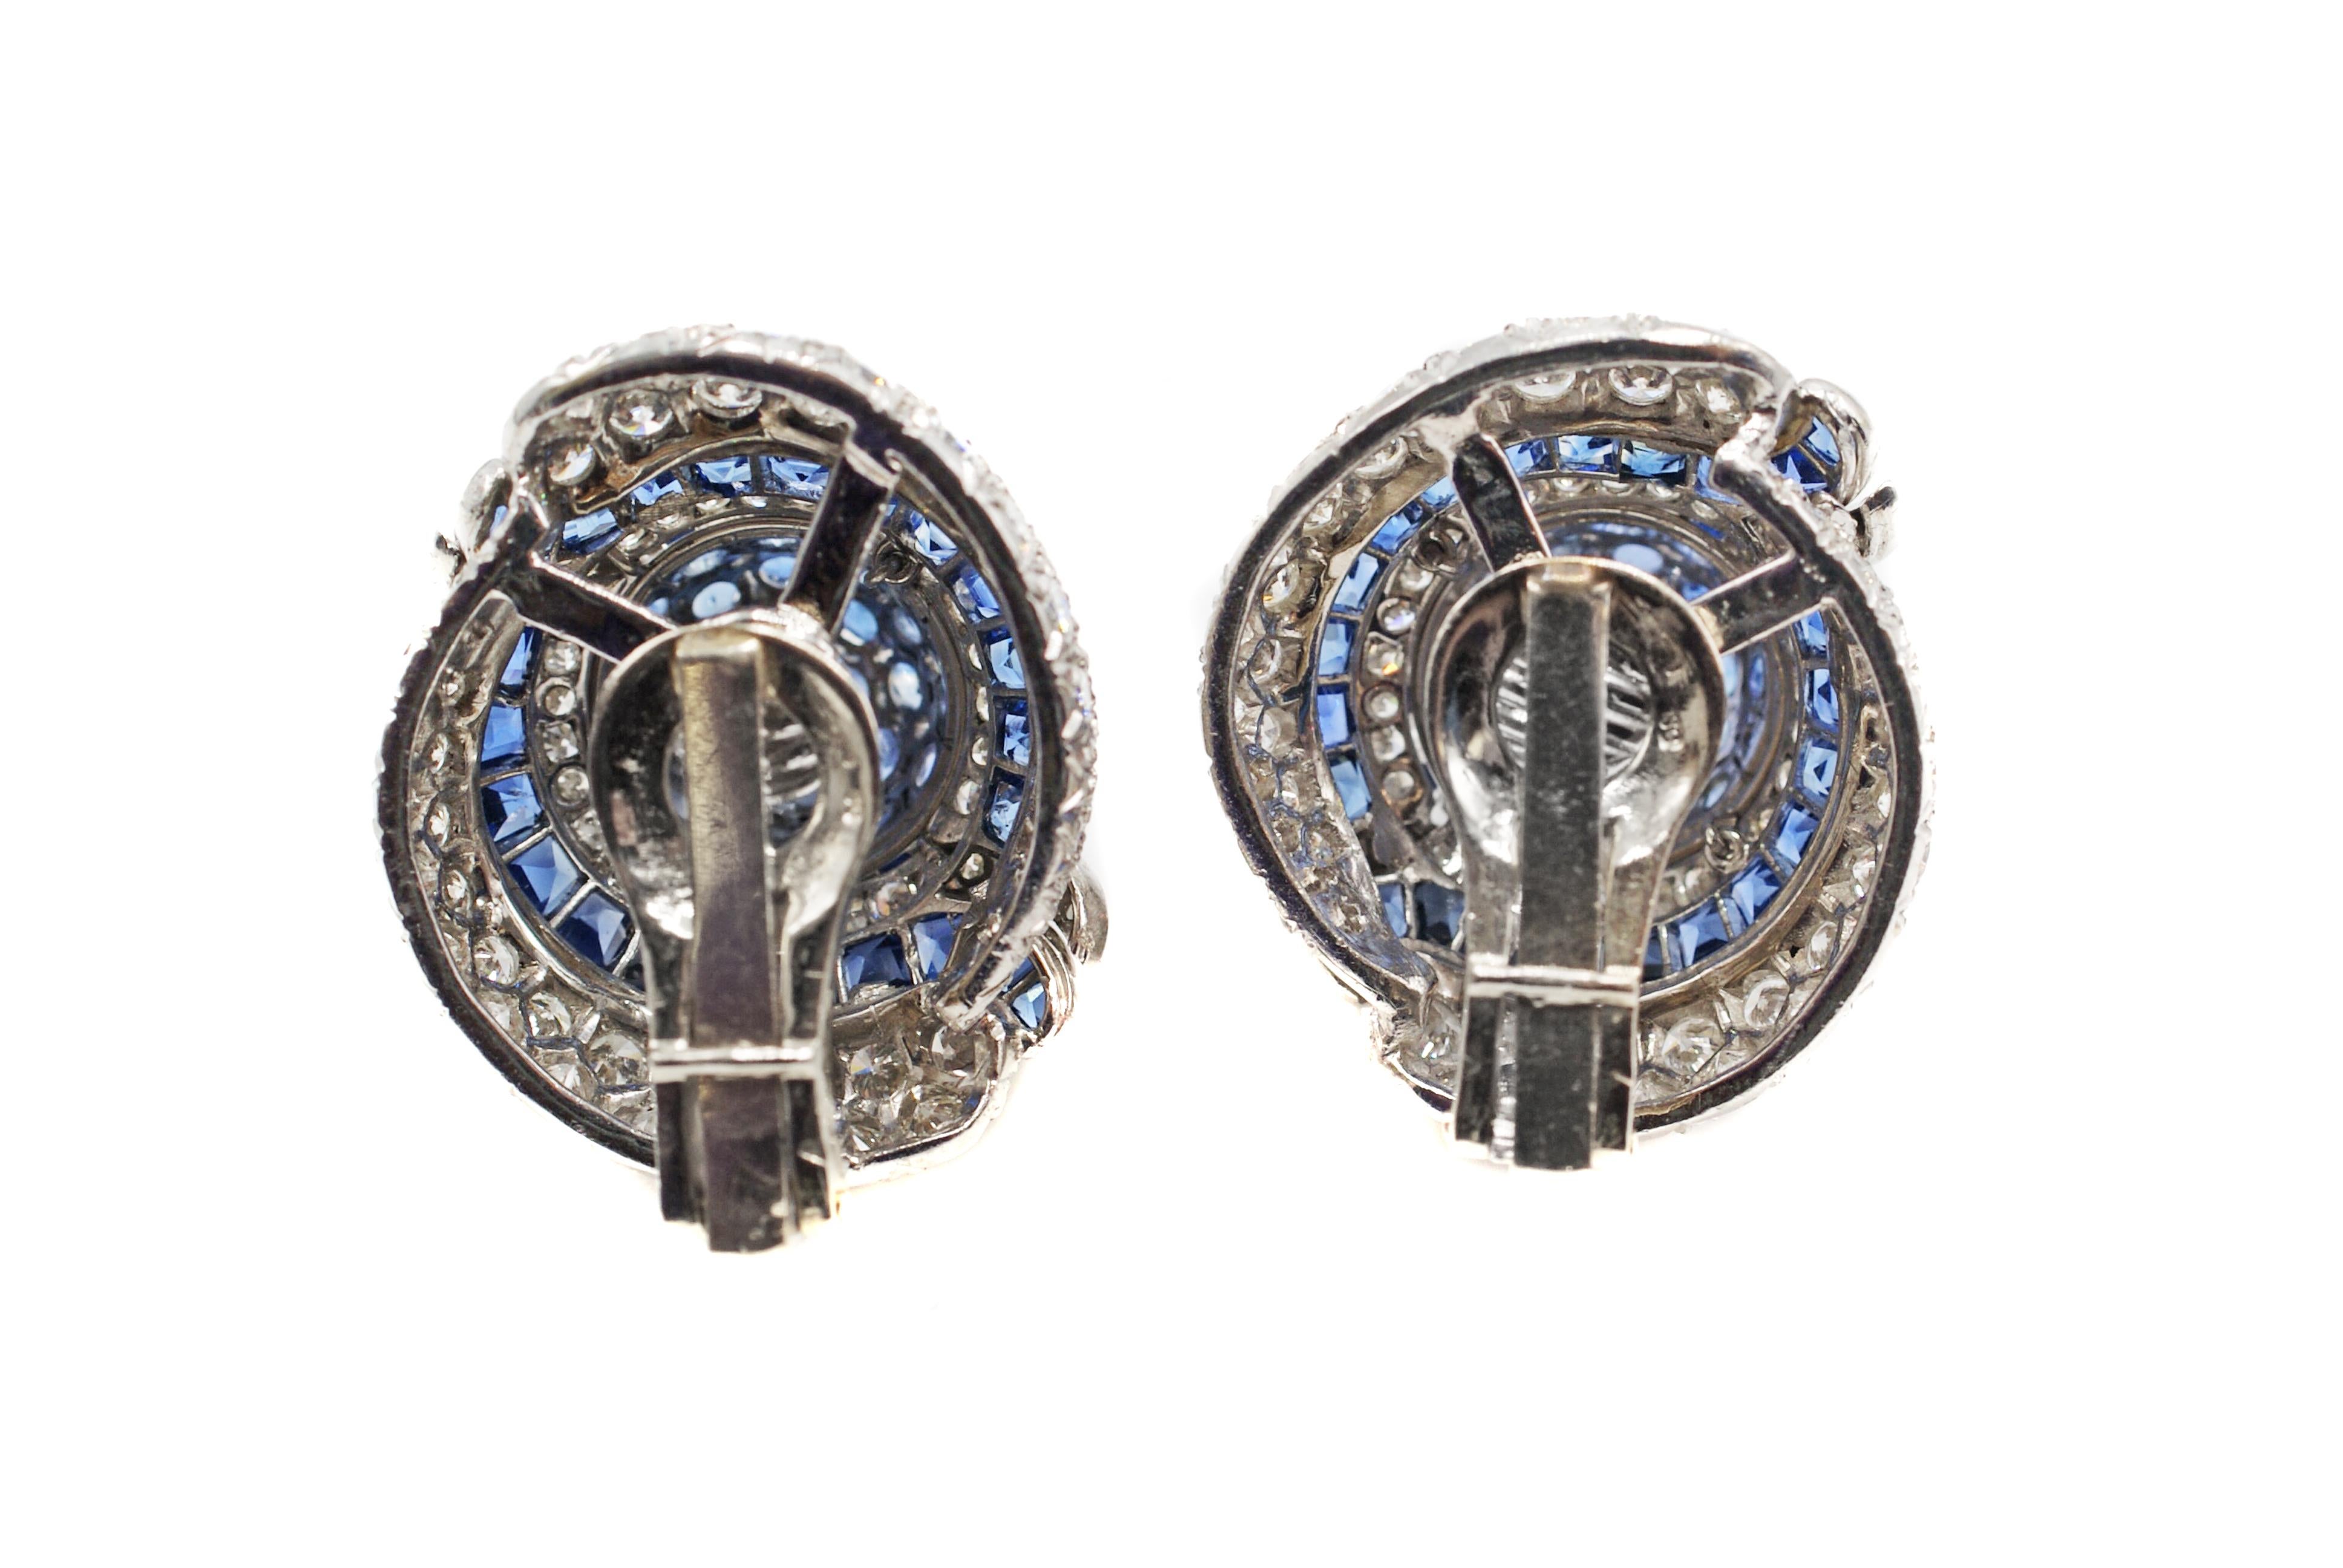 These impressive and incredibly well hand-crafted 1960s sapphire and diamond bombe ear clips are definitely a piece of statement jewelry. The perfectly matched 48 rectangular step-cut and 62 round cut sapphires are perfectly matched to show off